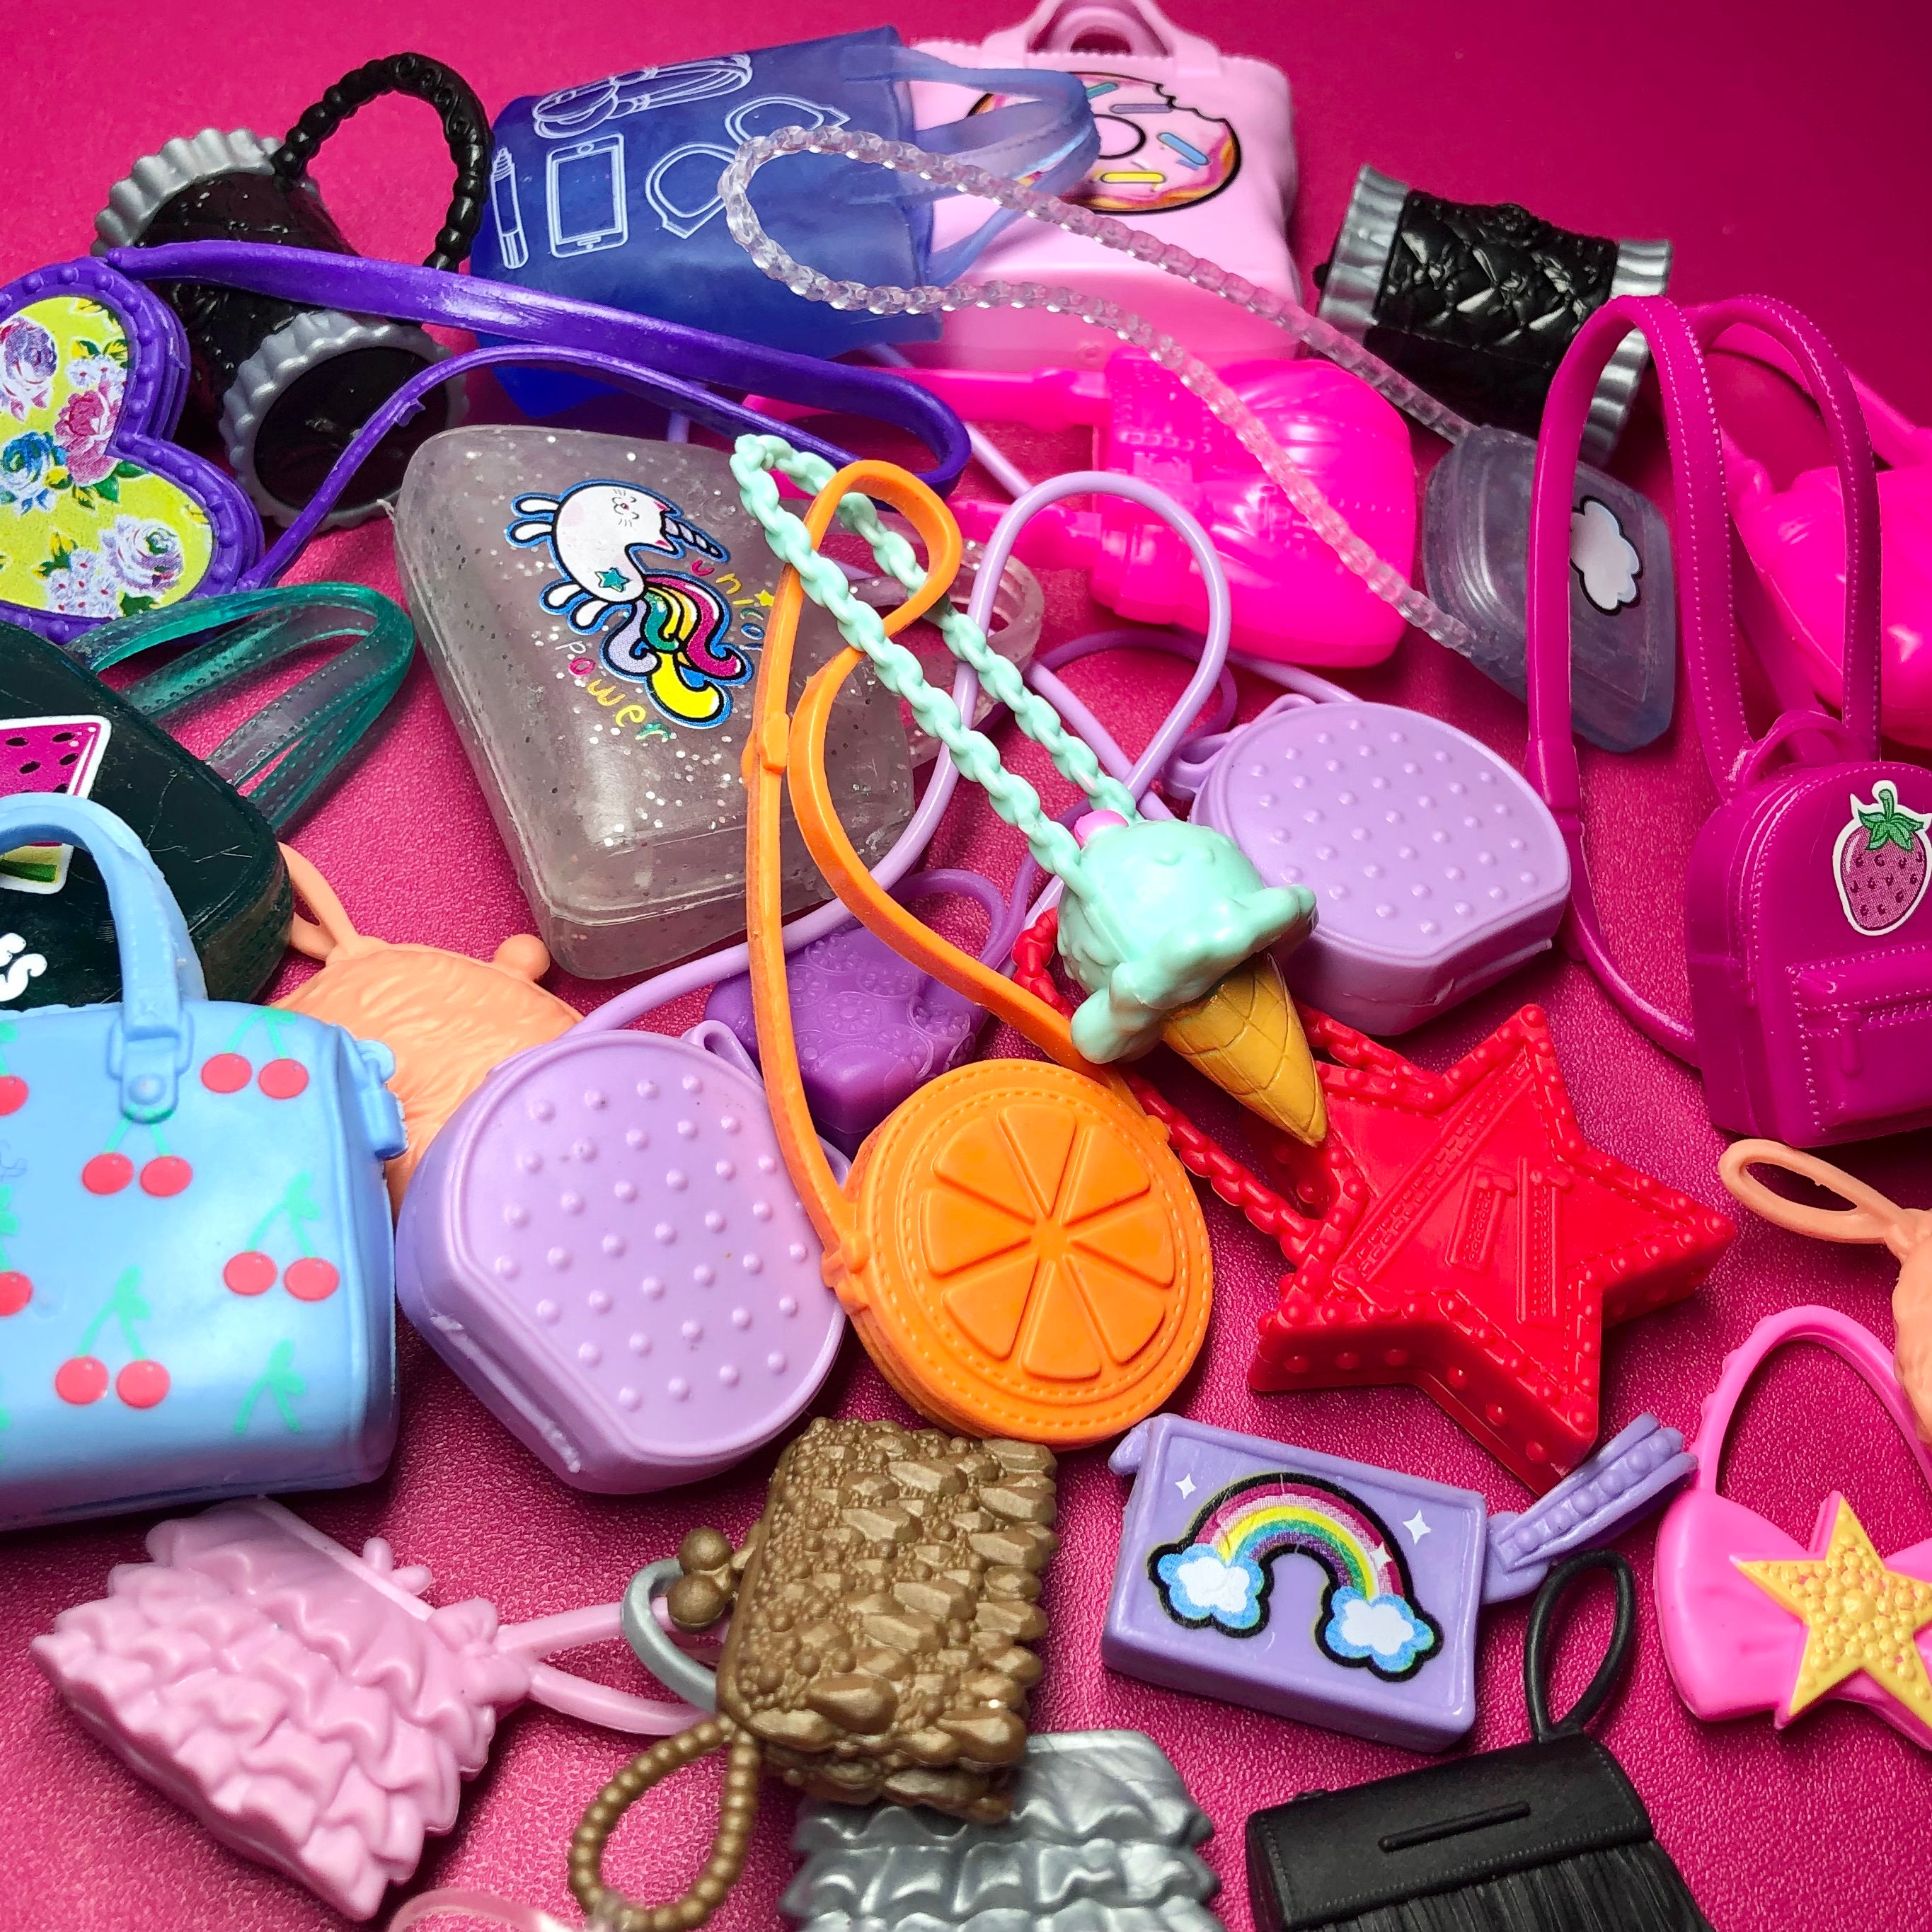 Buy Group of Barbie or Ken or Bratz Like Toys Doll Accessories  Miscellaneous Bags Purses Online in India - Etsy